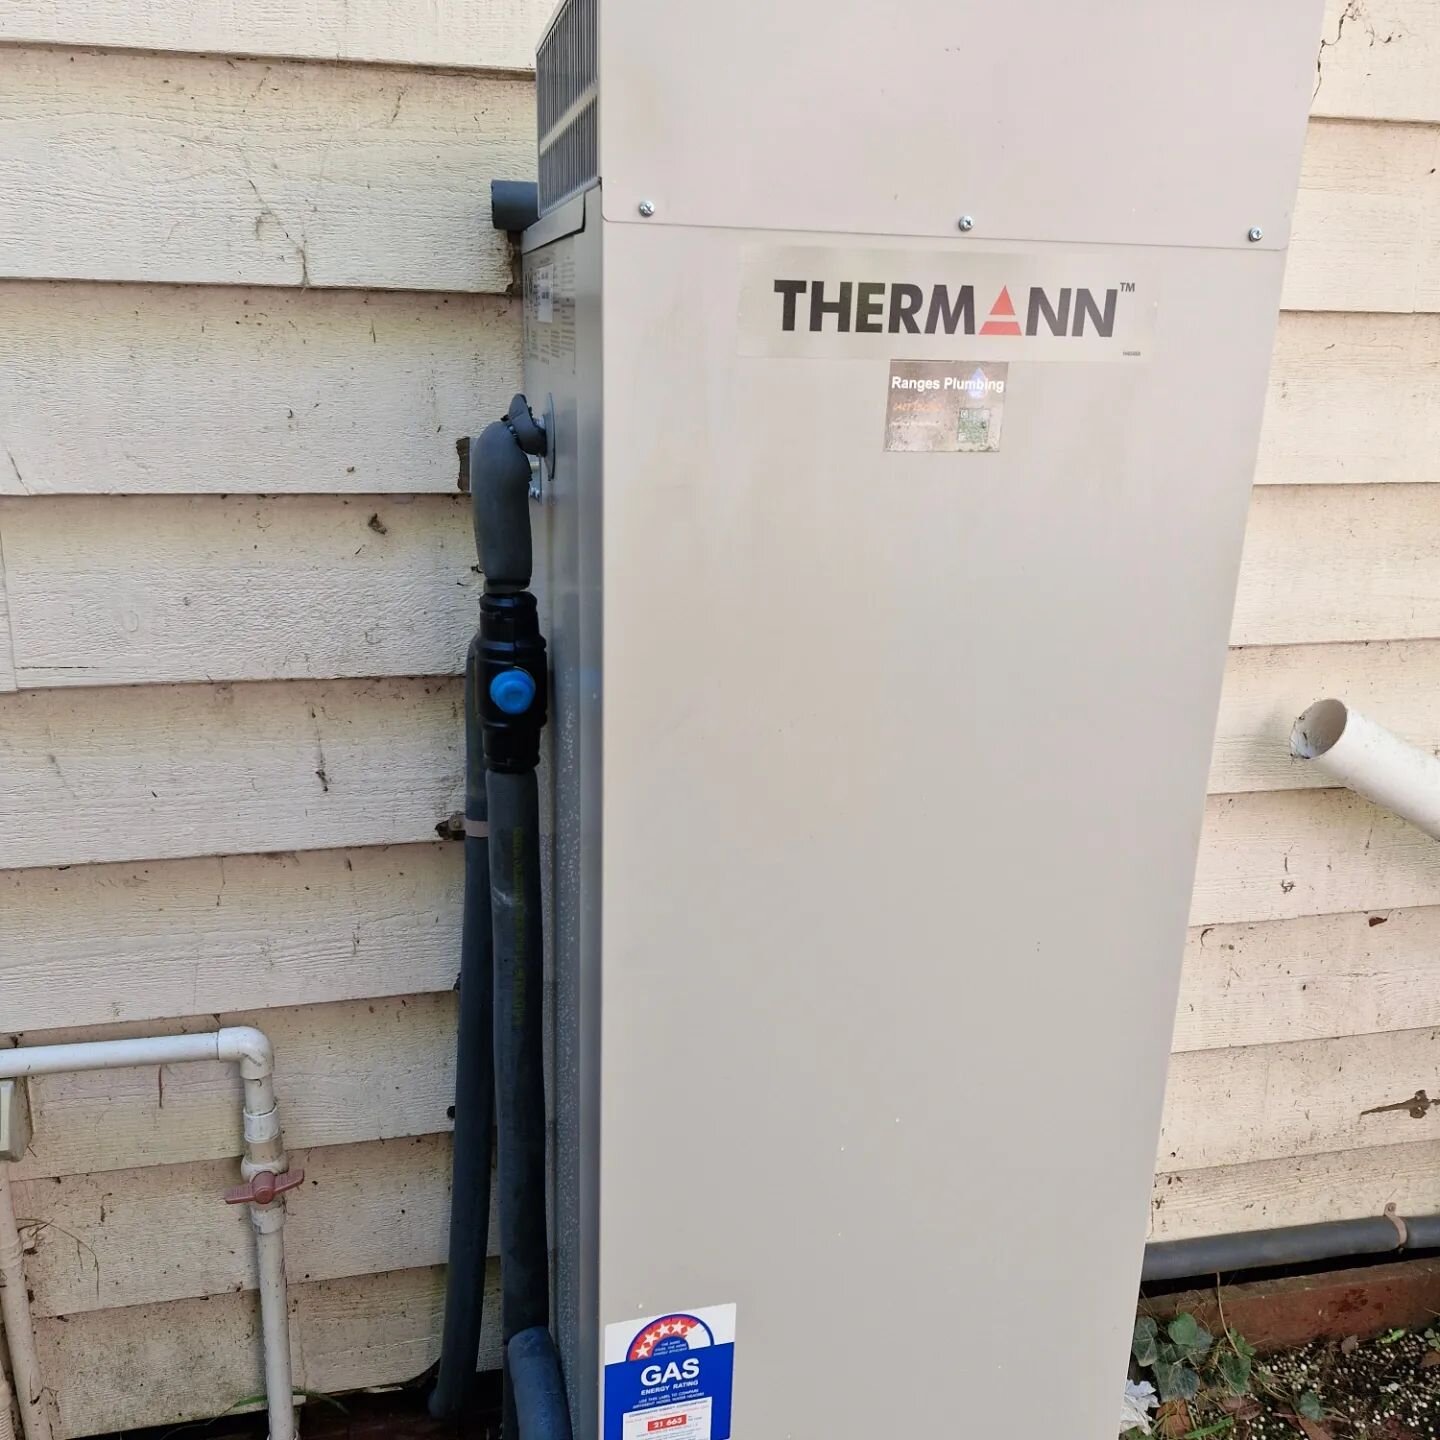 We've been up to a bit of everything the last week or so! Hotty change overs, Blockages, new toilets, rough ins, drainage and some basic tap maintenance!

Local and Reliable!

#thermann #reece #hotwater
#auspex #plumber #hillslife #localbusiness #mai